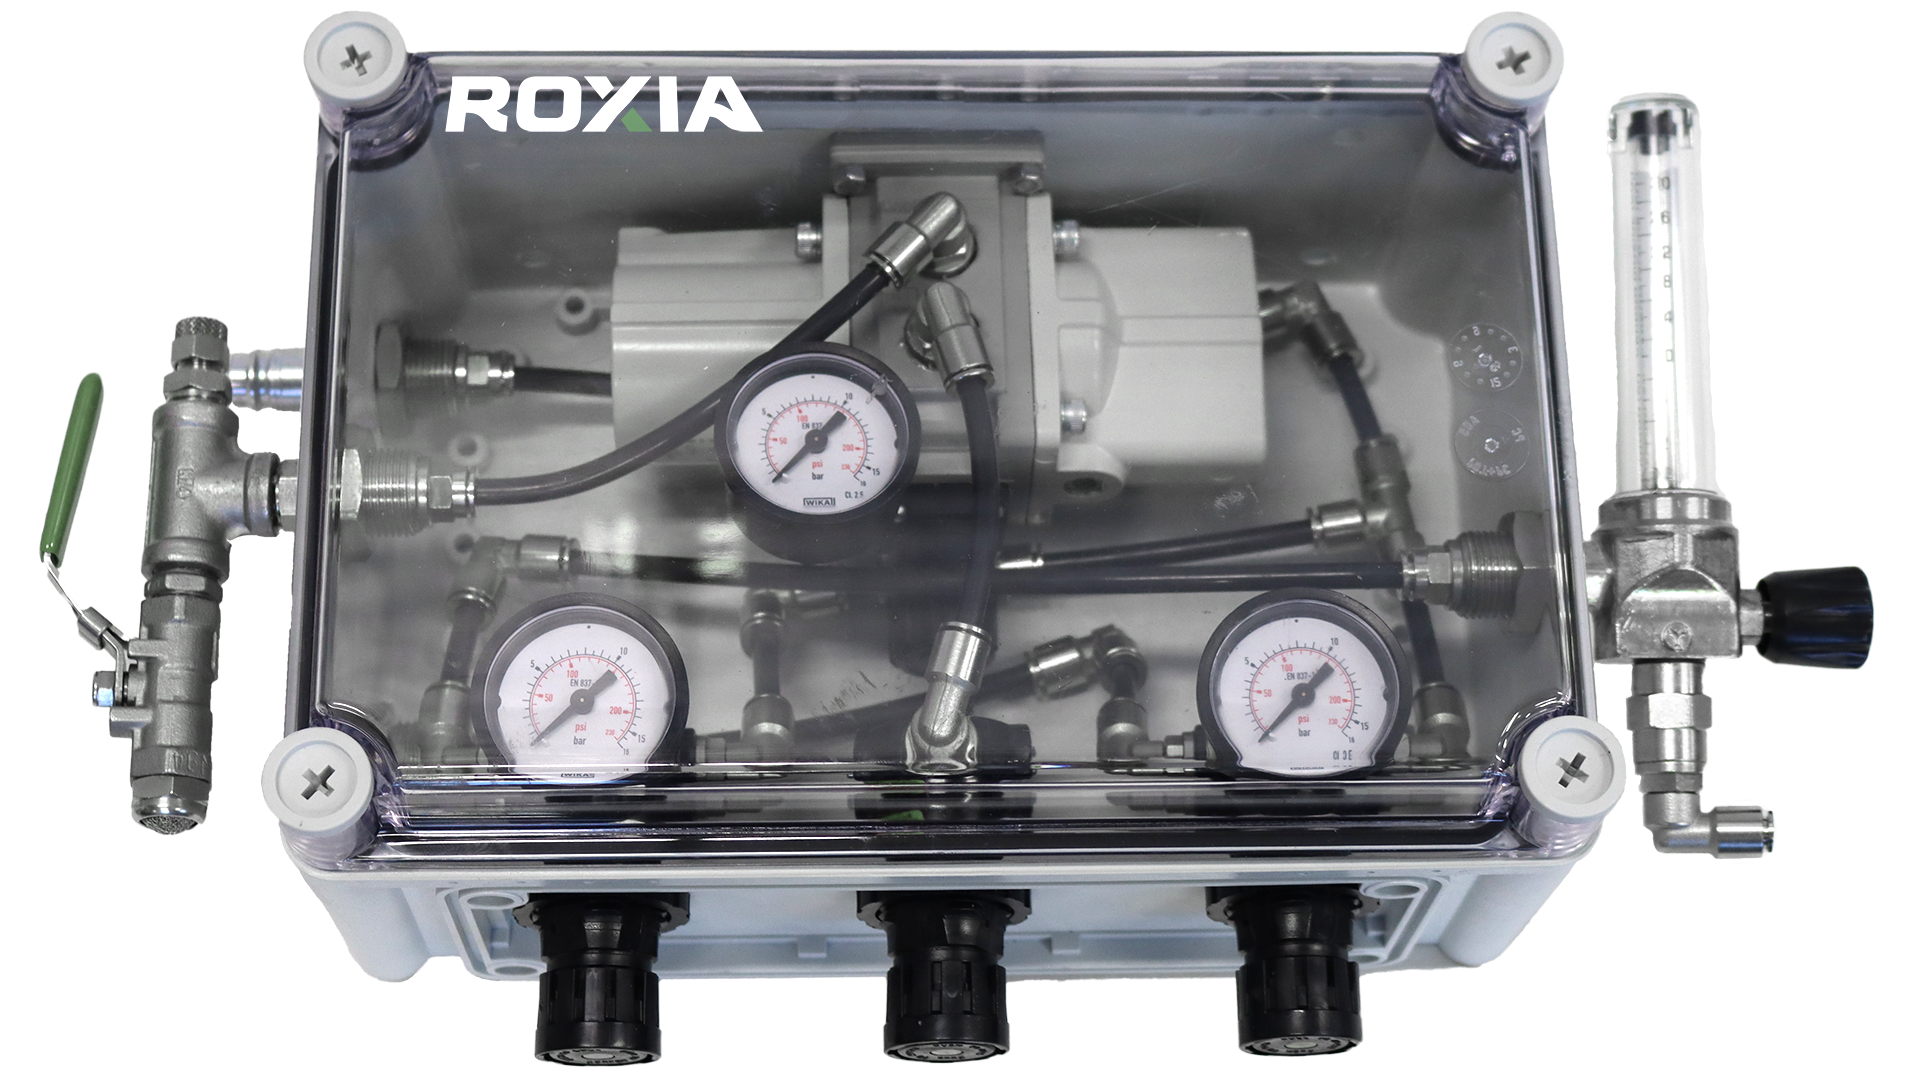 Roxia Filter Press test unit's portable control unit uses pressurized air for exact sequence management.